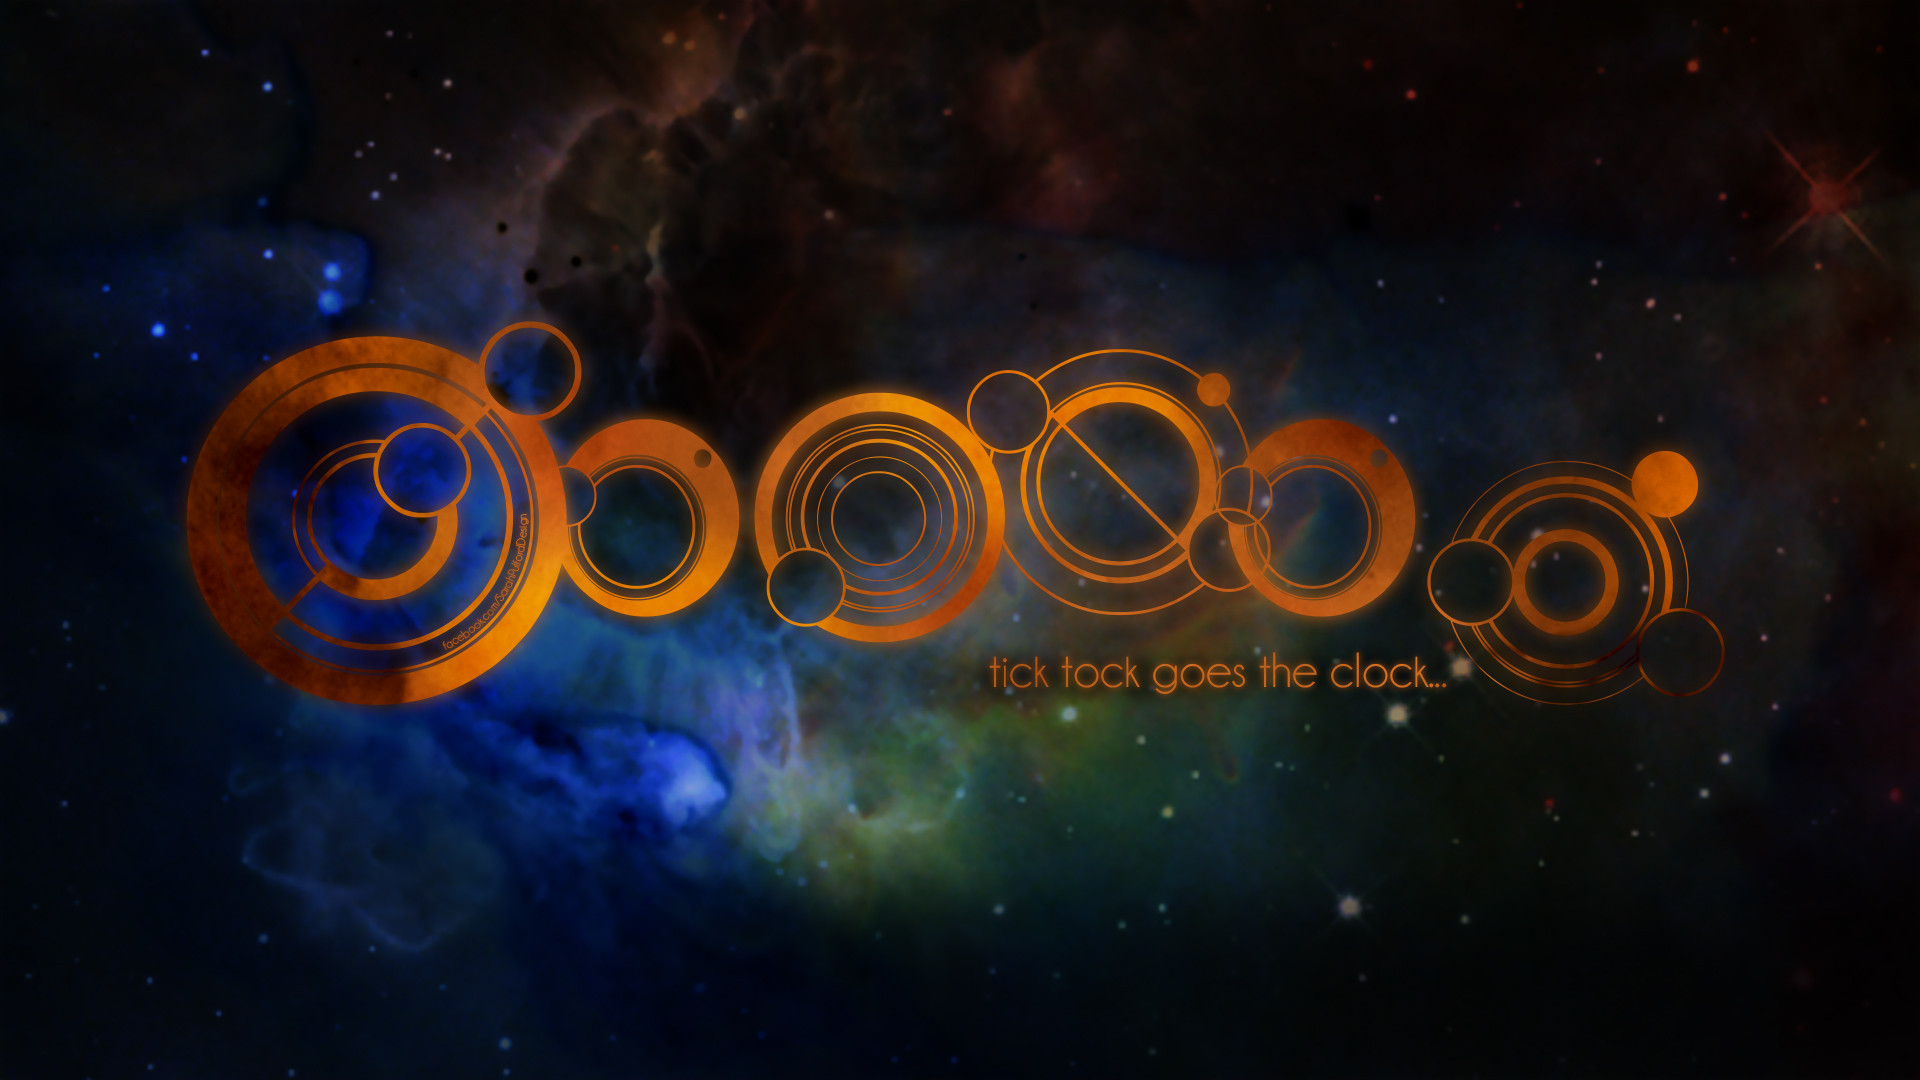 HD Doctor Who Background